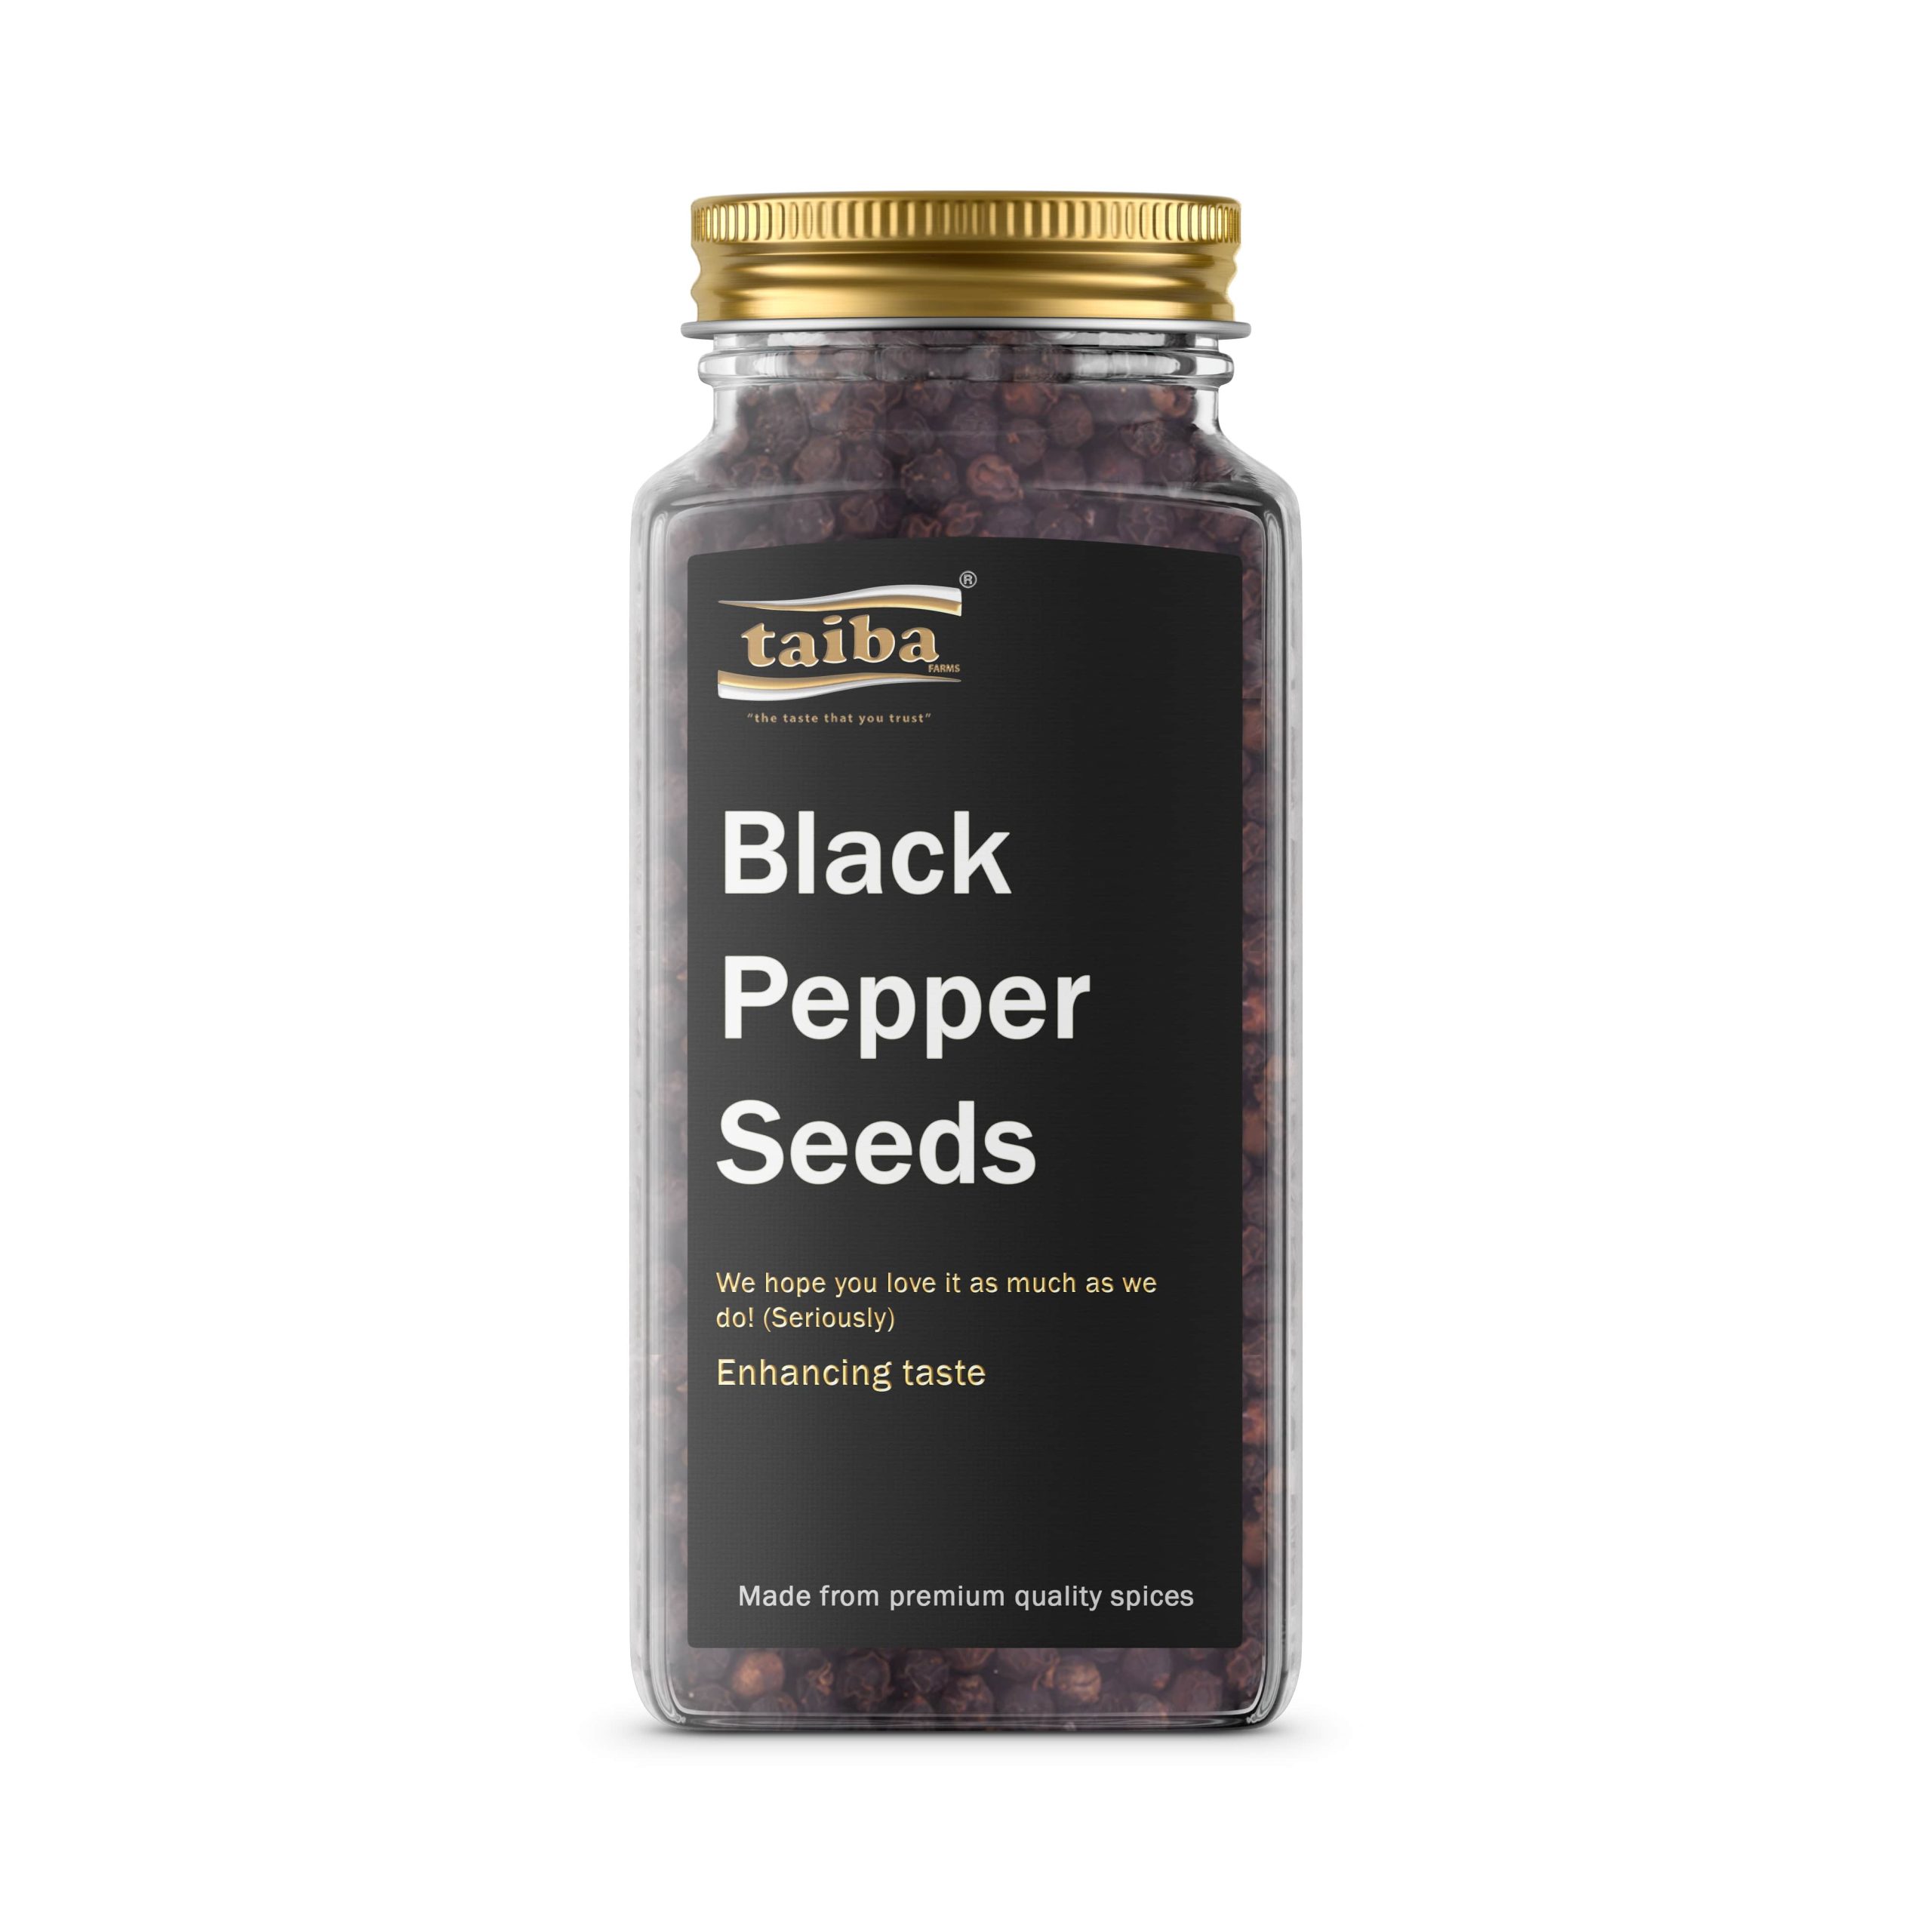 black-pepper-seeds-online-grocery-hearps-and-spices-online-home-delivery-in-UAE-Dubai-Abu-Dhabisaudi-arabia-oman-brazil-italy